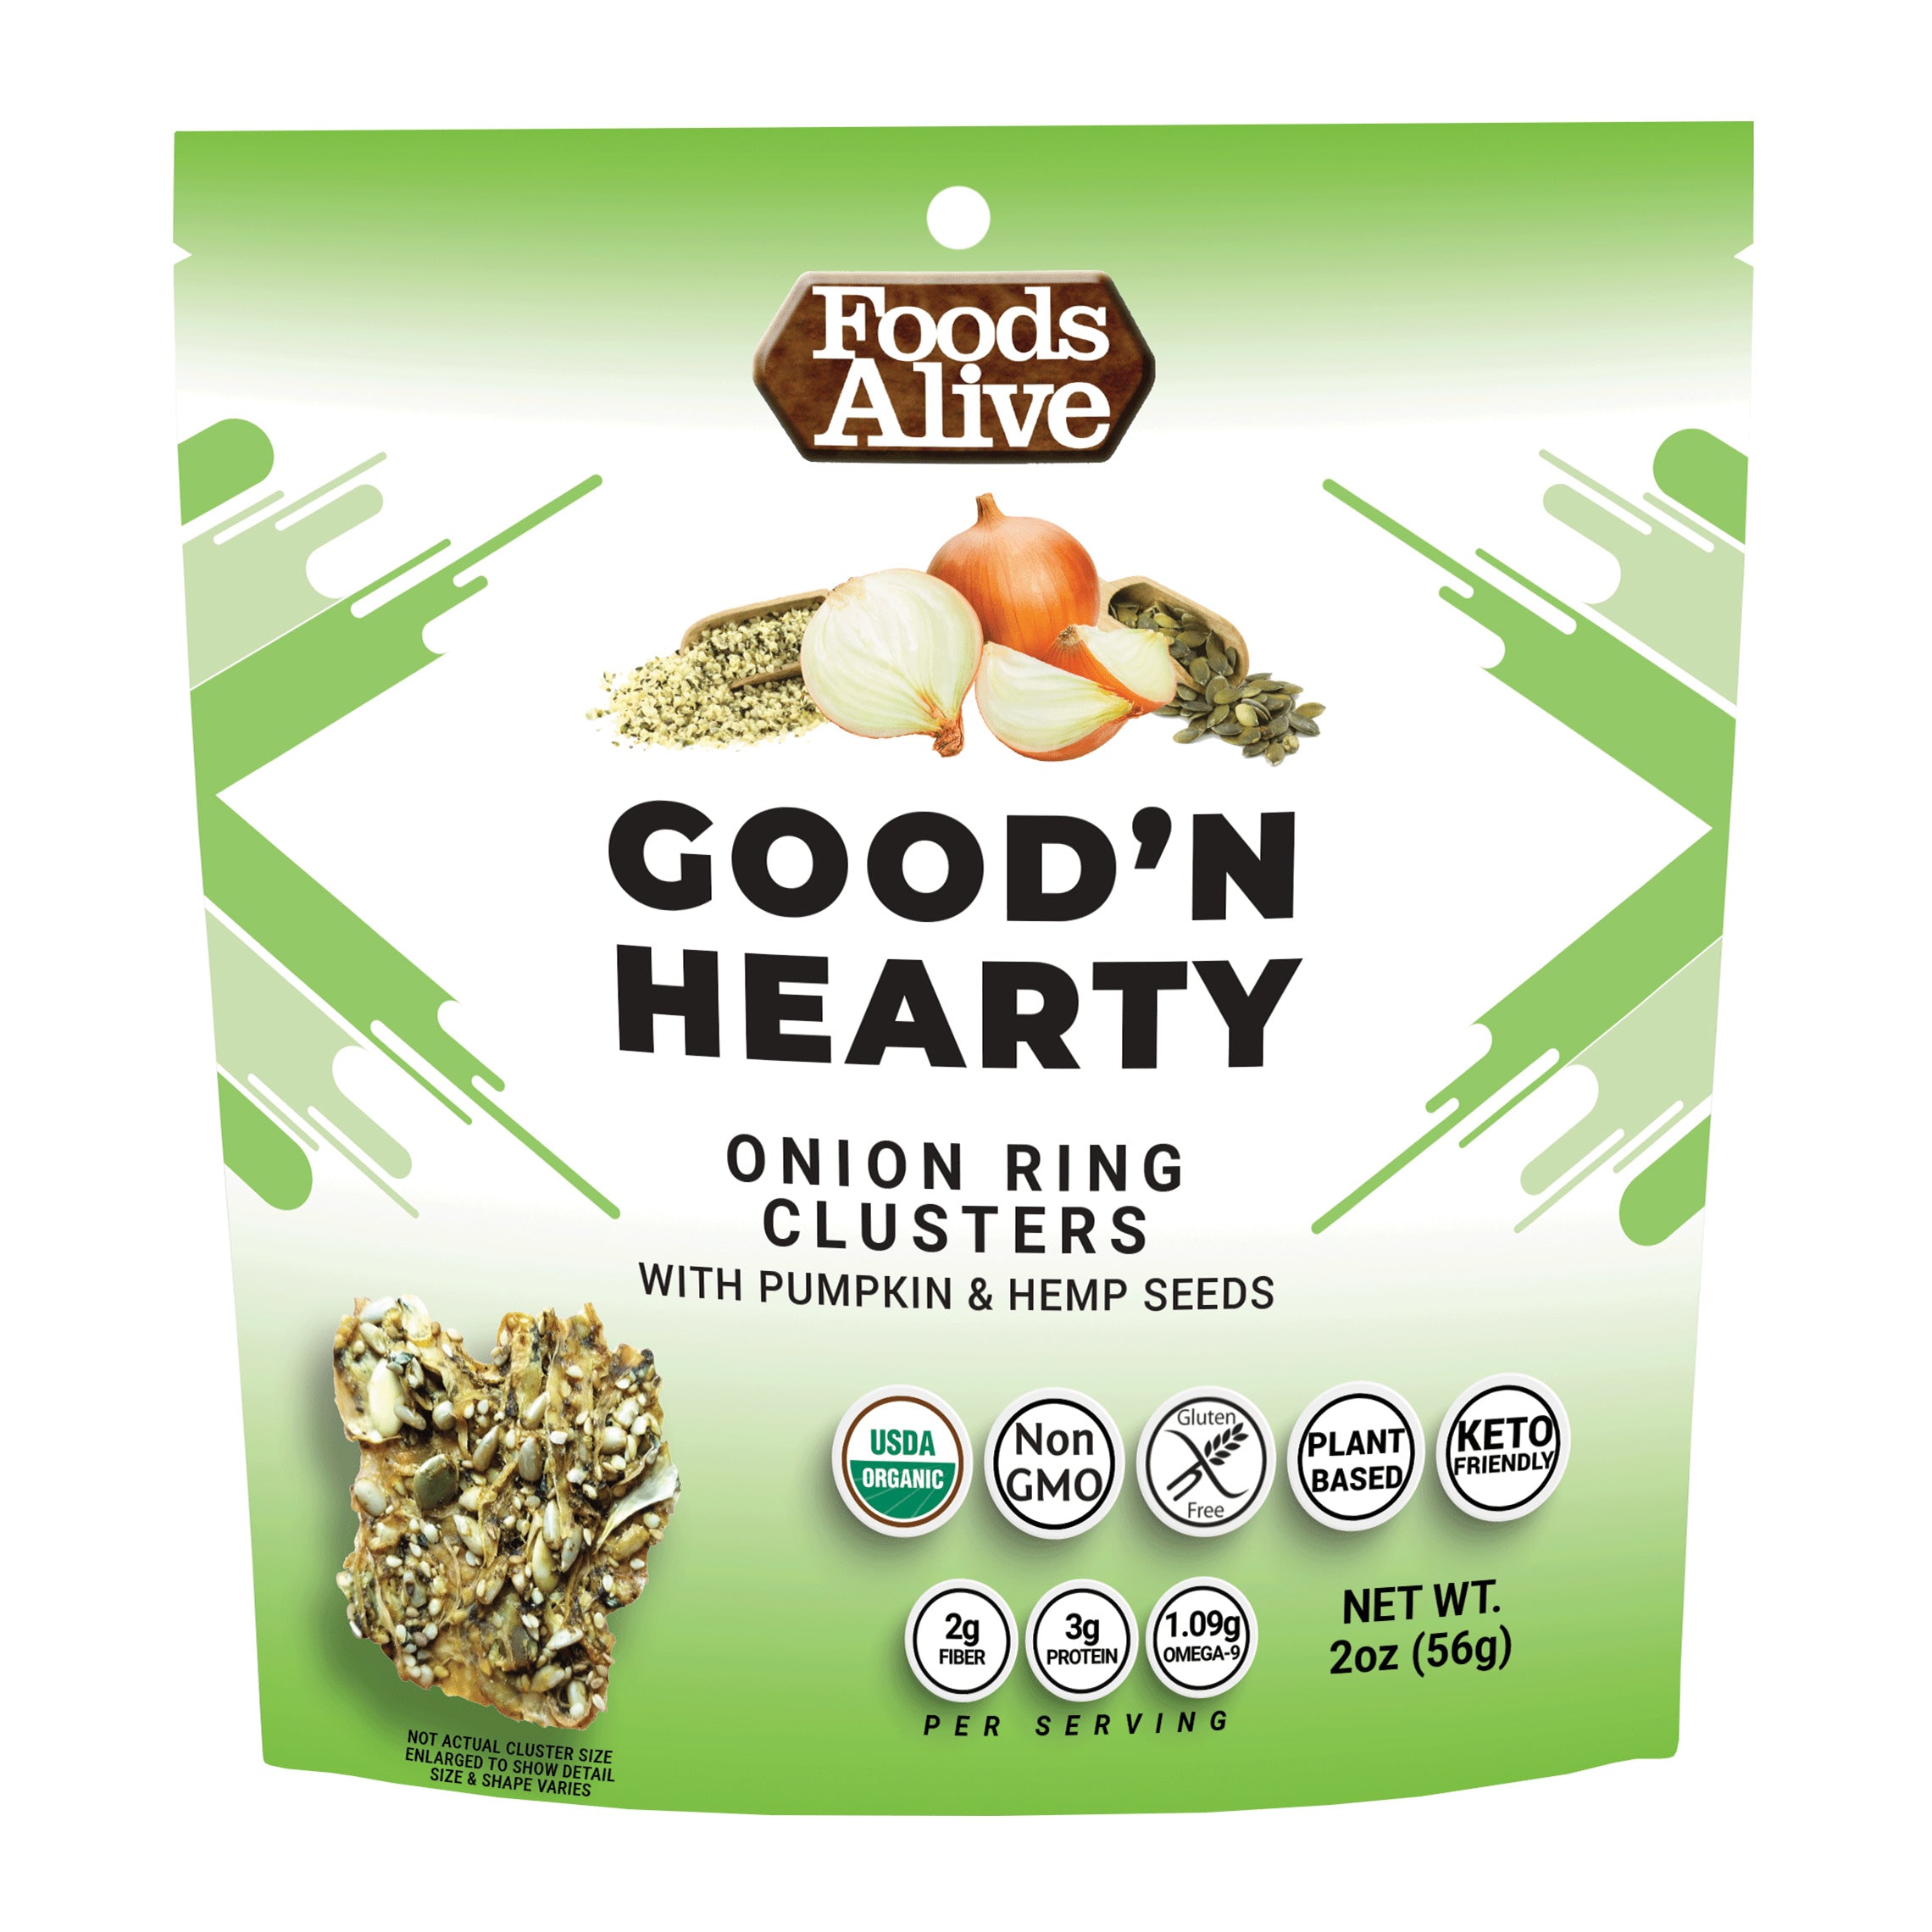 Foods Alive Organic Onion Ring Clusters - Good'N Hearty